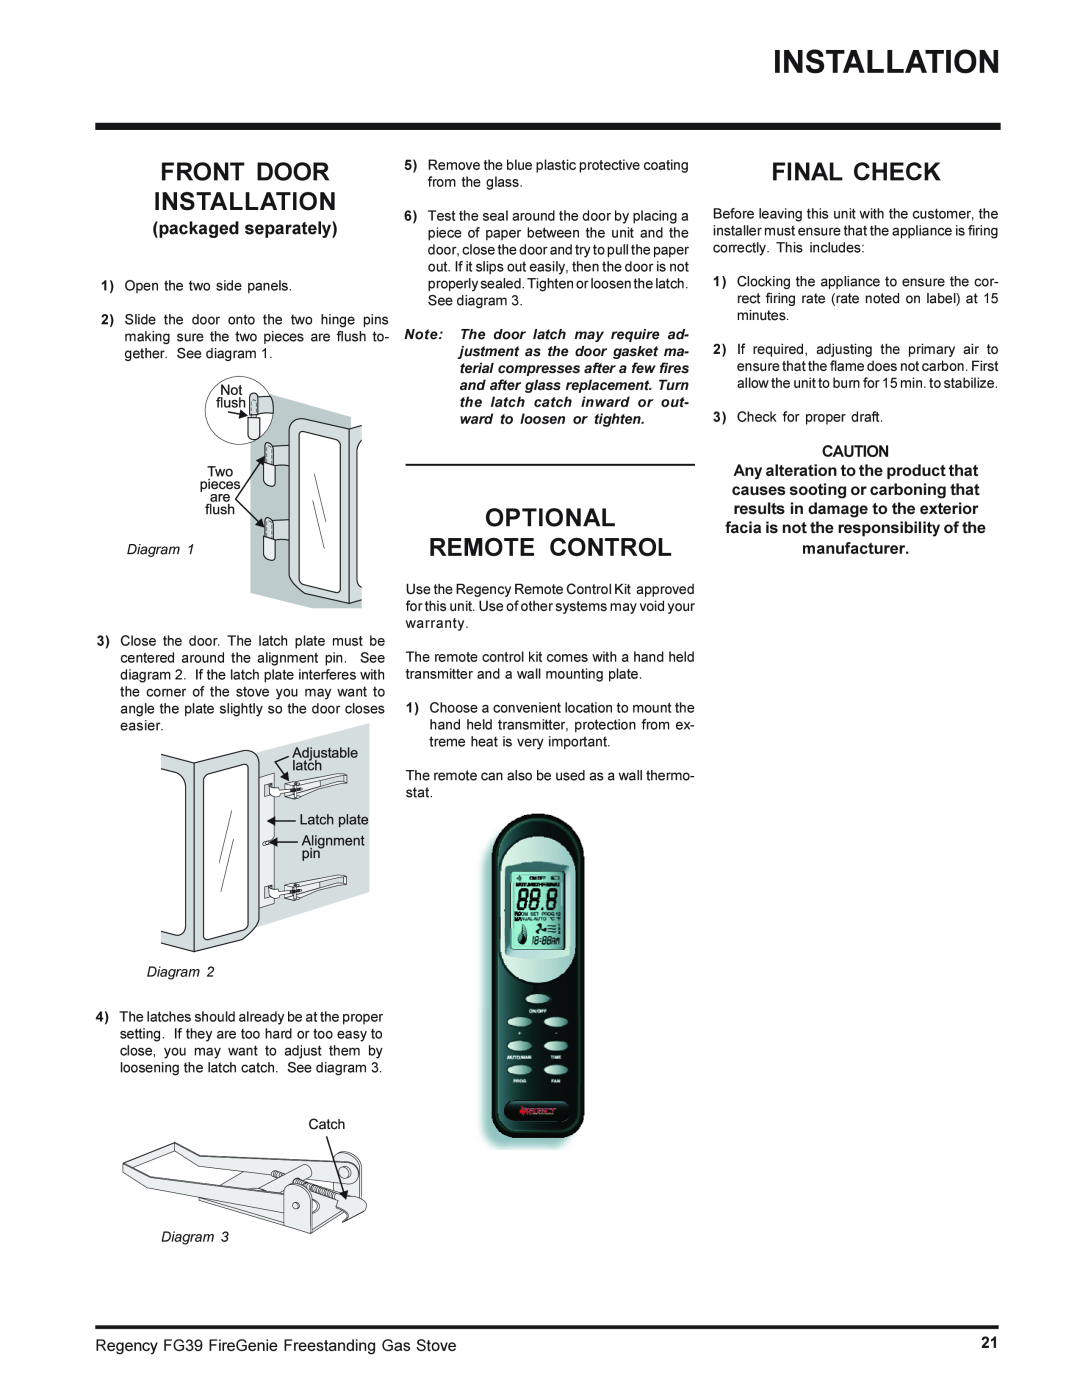 Regency FG39-NG, FG39-LPG Front Door Installation, Optional Remote Control, Final Check, packaged separately, Diagram 